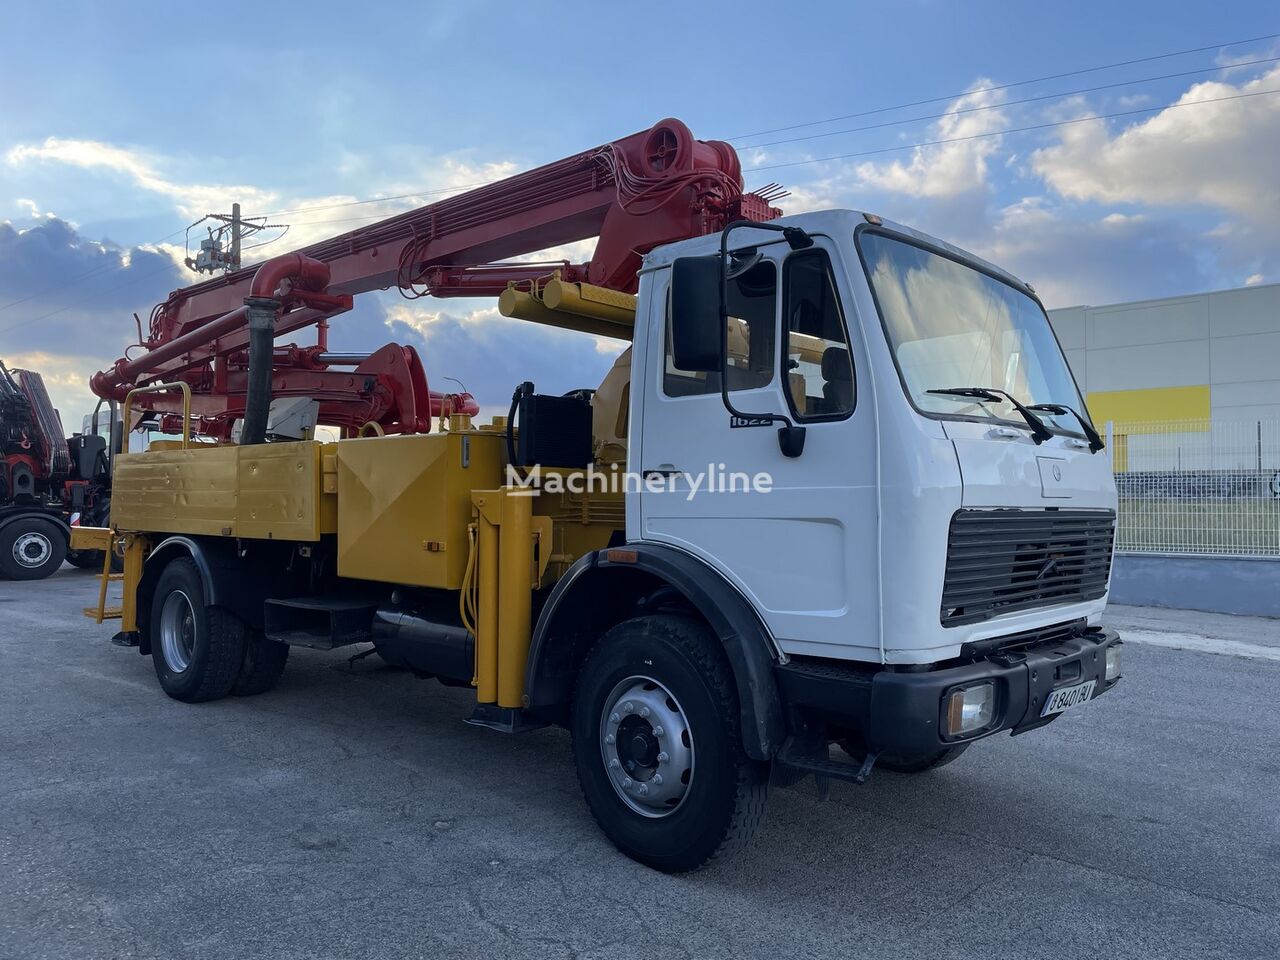 Schwing 23/4  on chassis Mercedes-Benz 1622  concrete pump